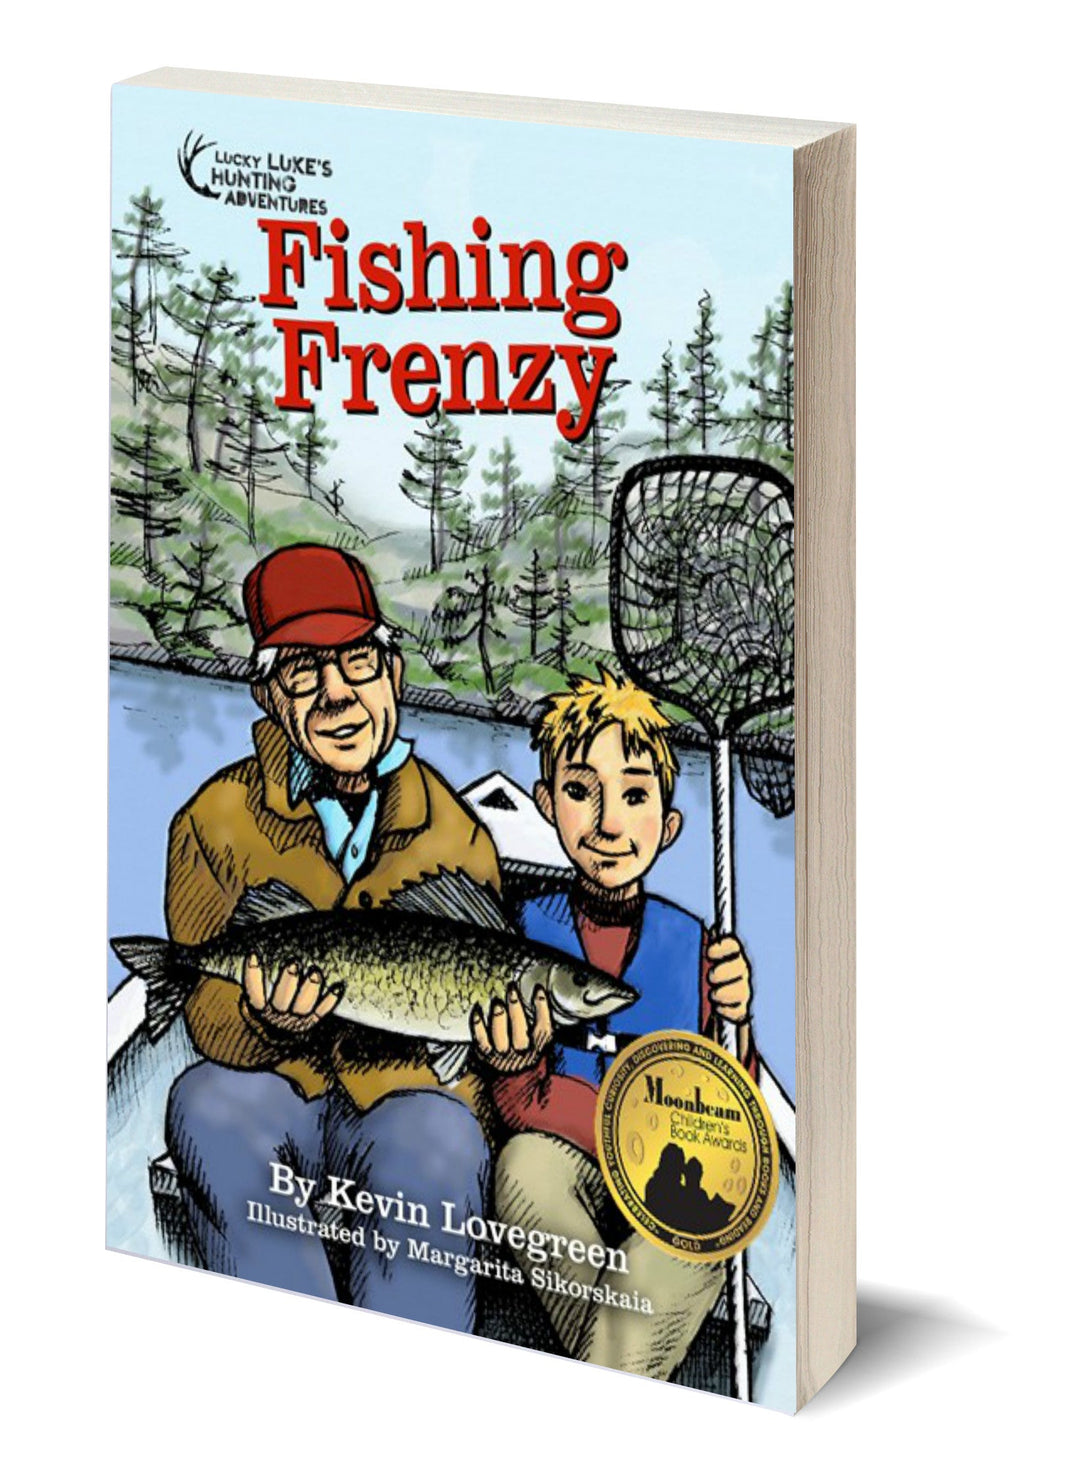 Fishing Books For Kids Inspire Outdoor Activity And The Yearn To Learn